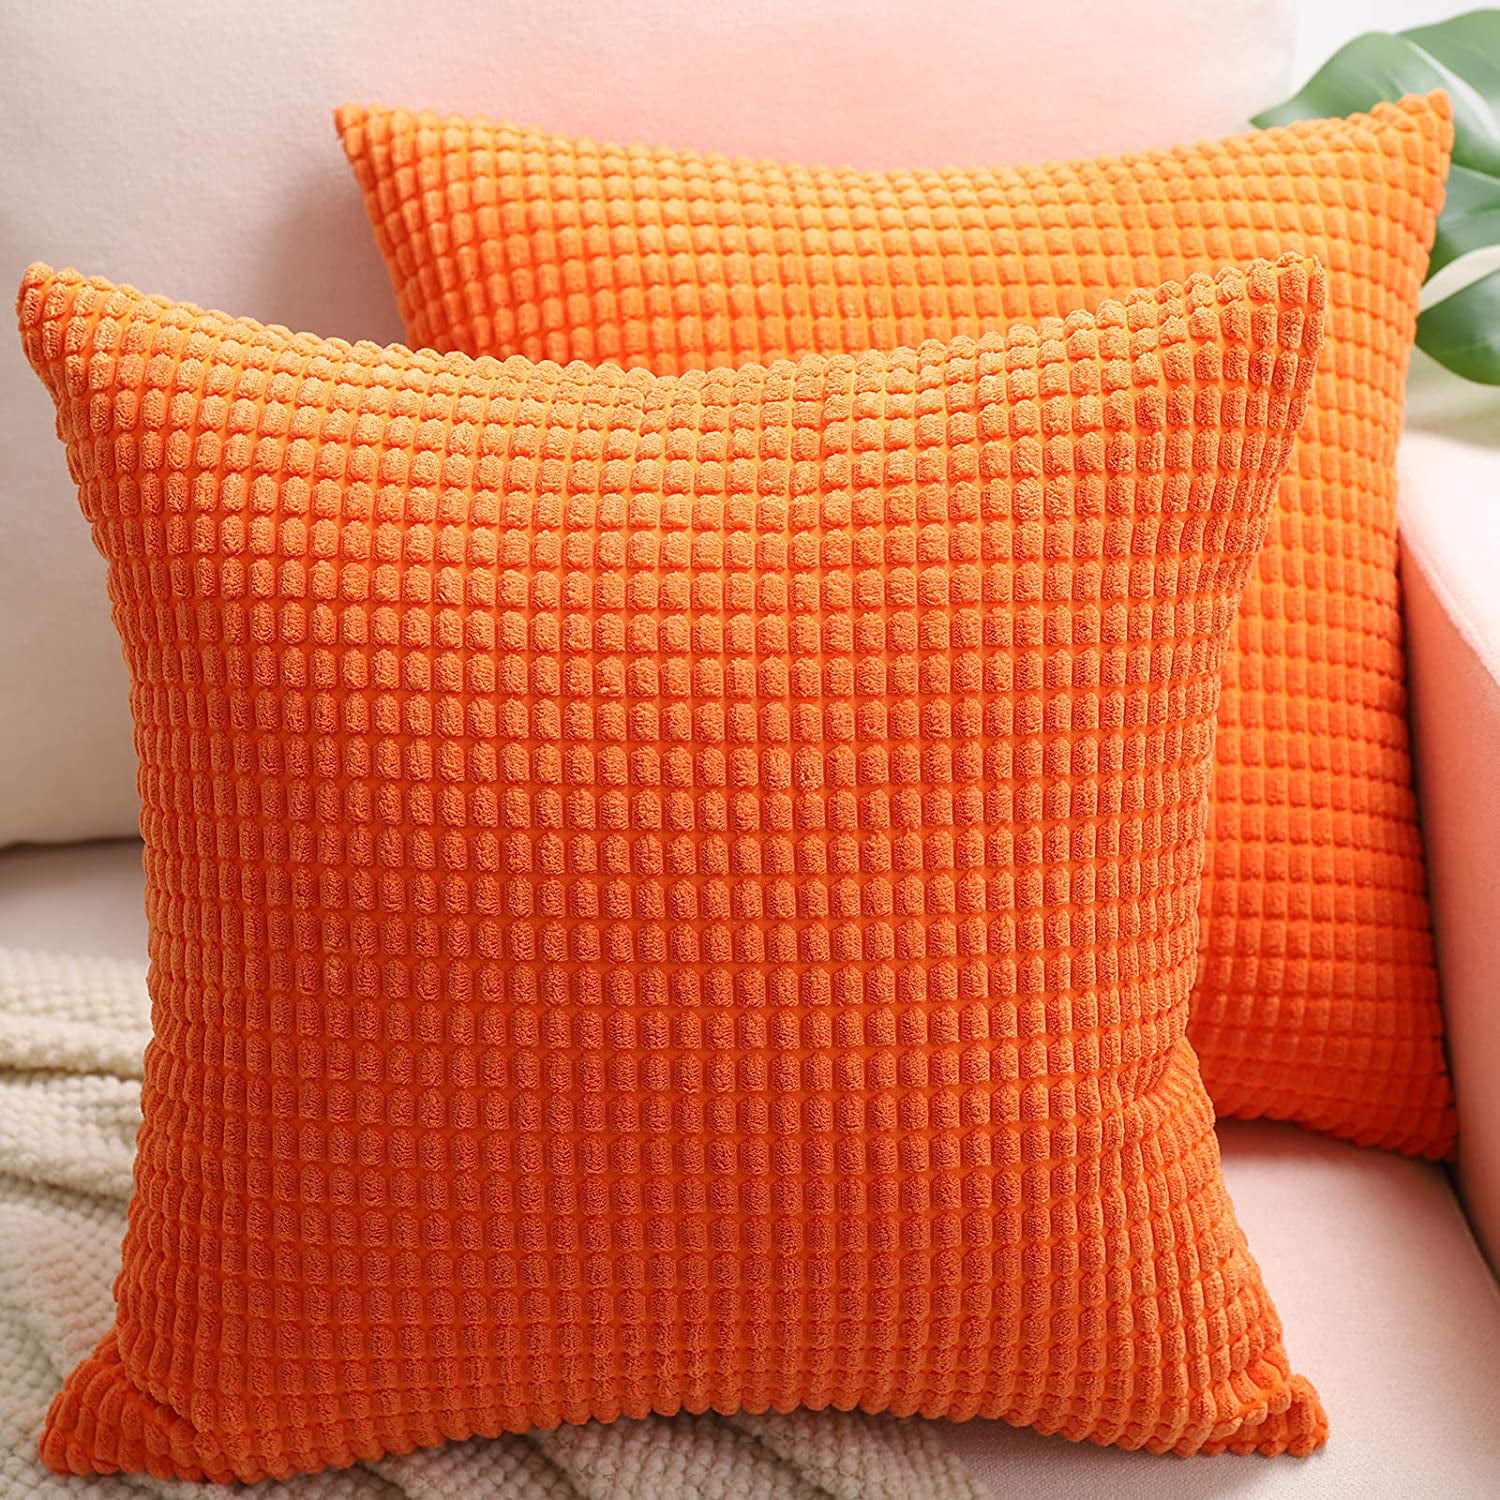 FabricMCC Pillow Covers Decorative Pillow Covers 24X24 Set of 2 Soft 